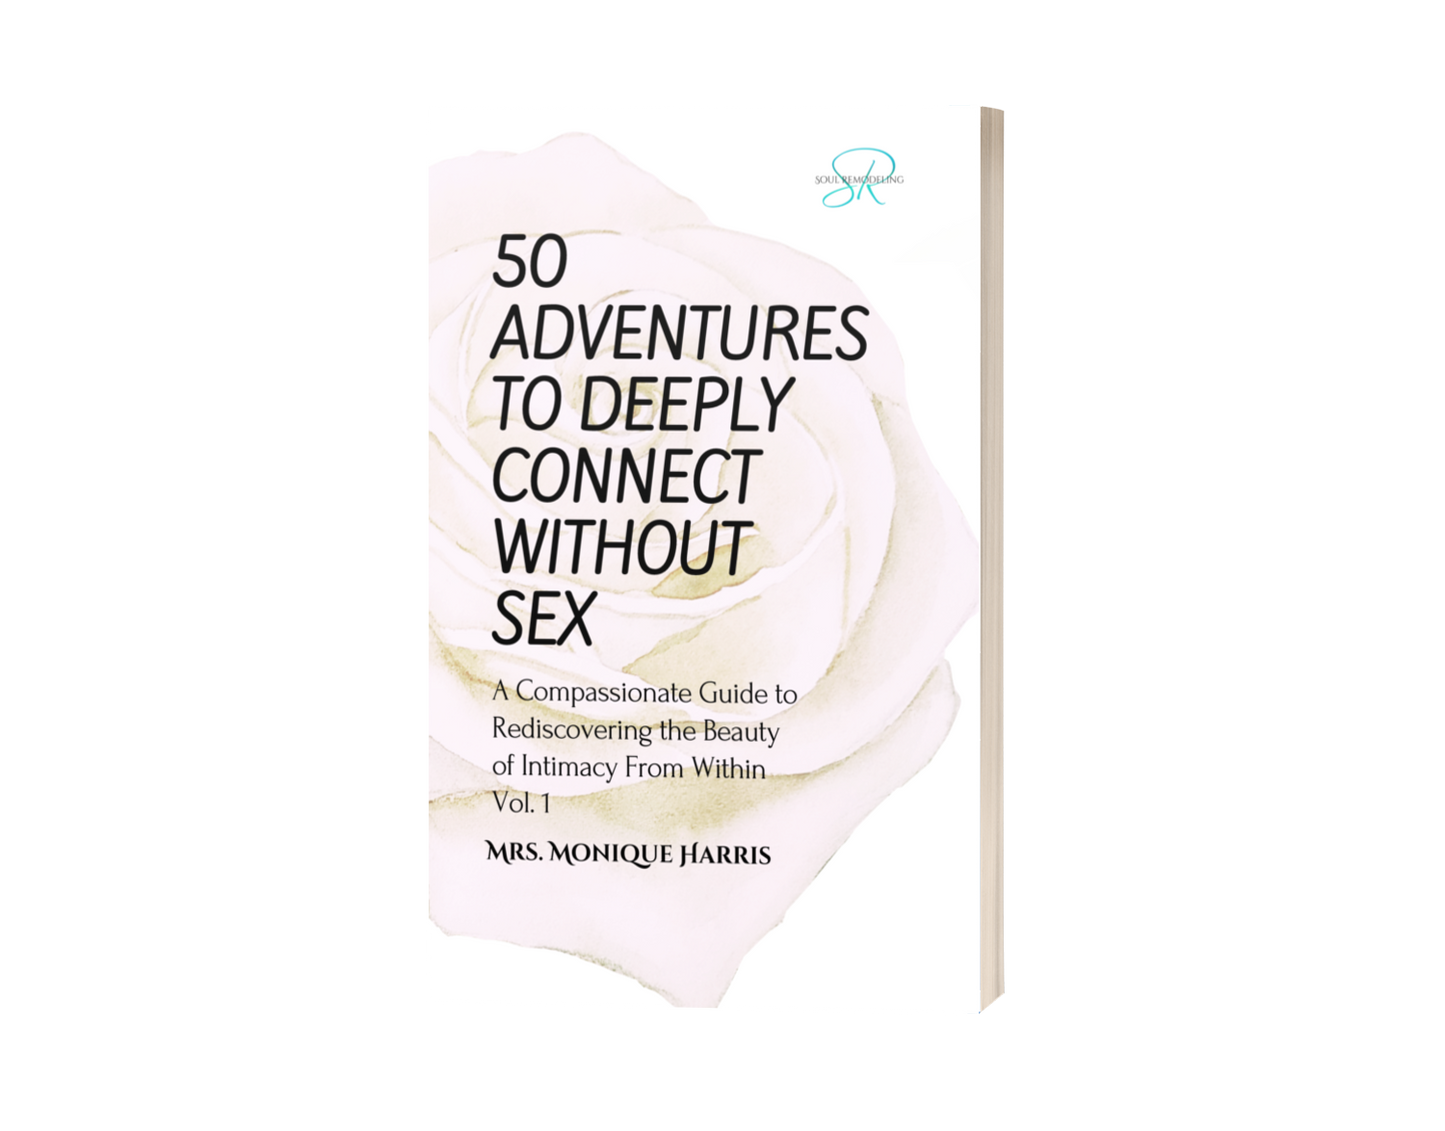 PRE-ORDER: 50 Adventures to Deeply Connect Without Sex™, Vol. 1